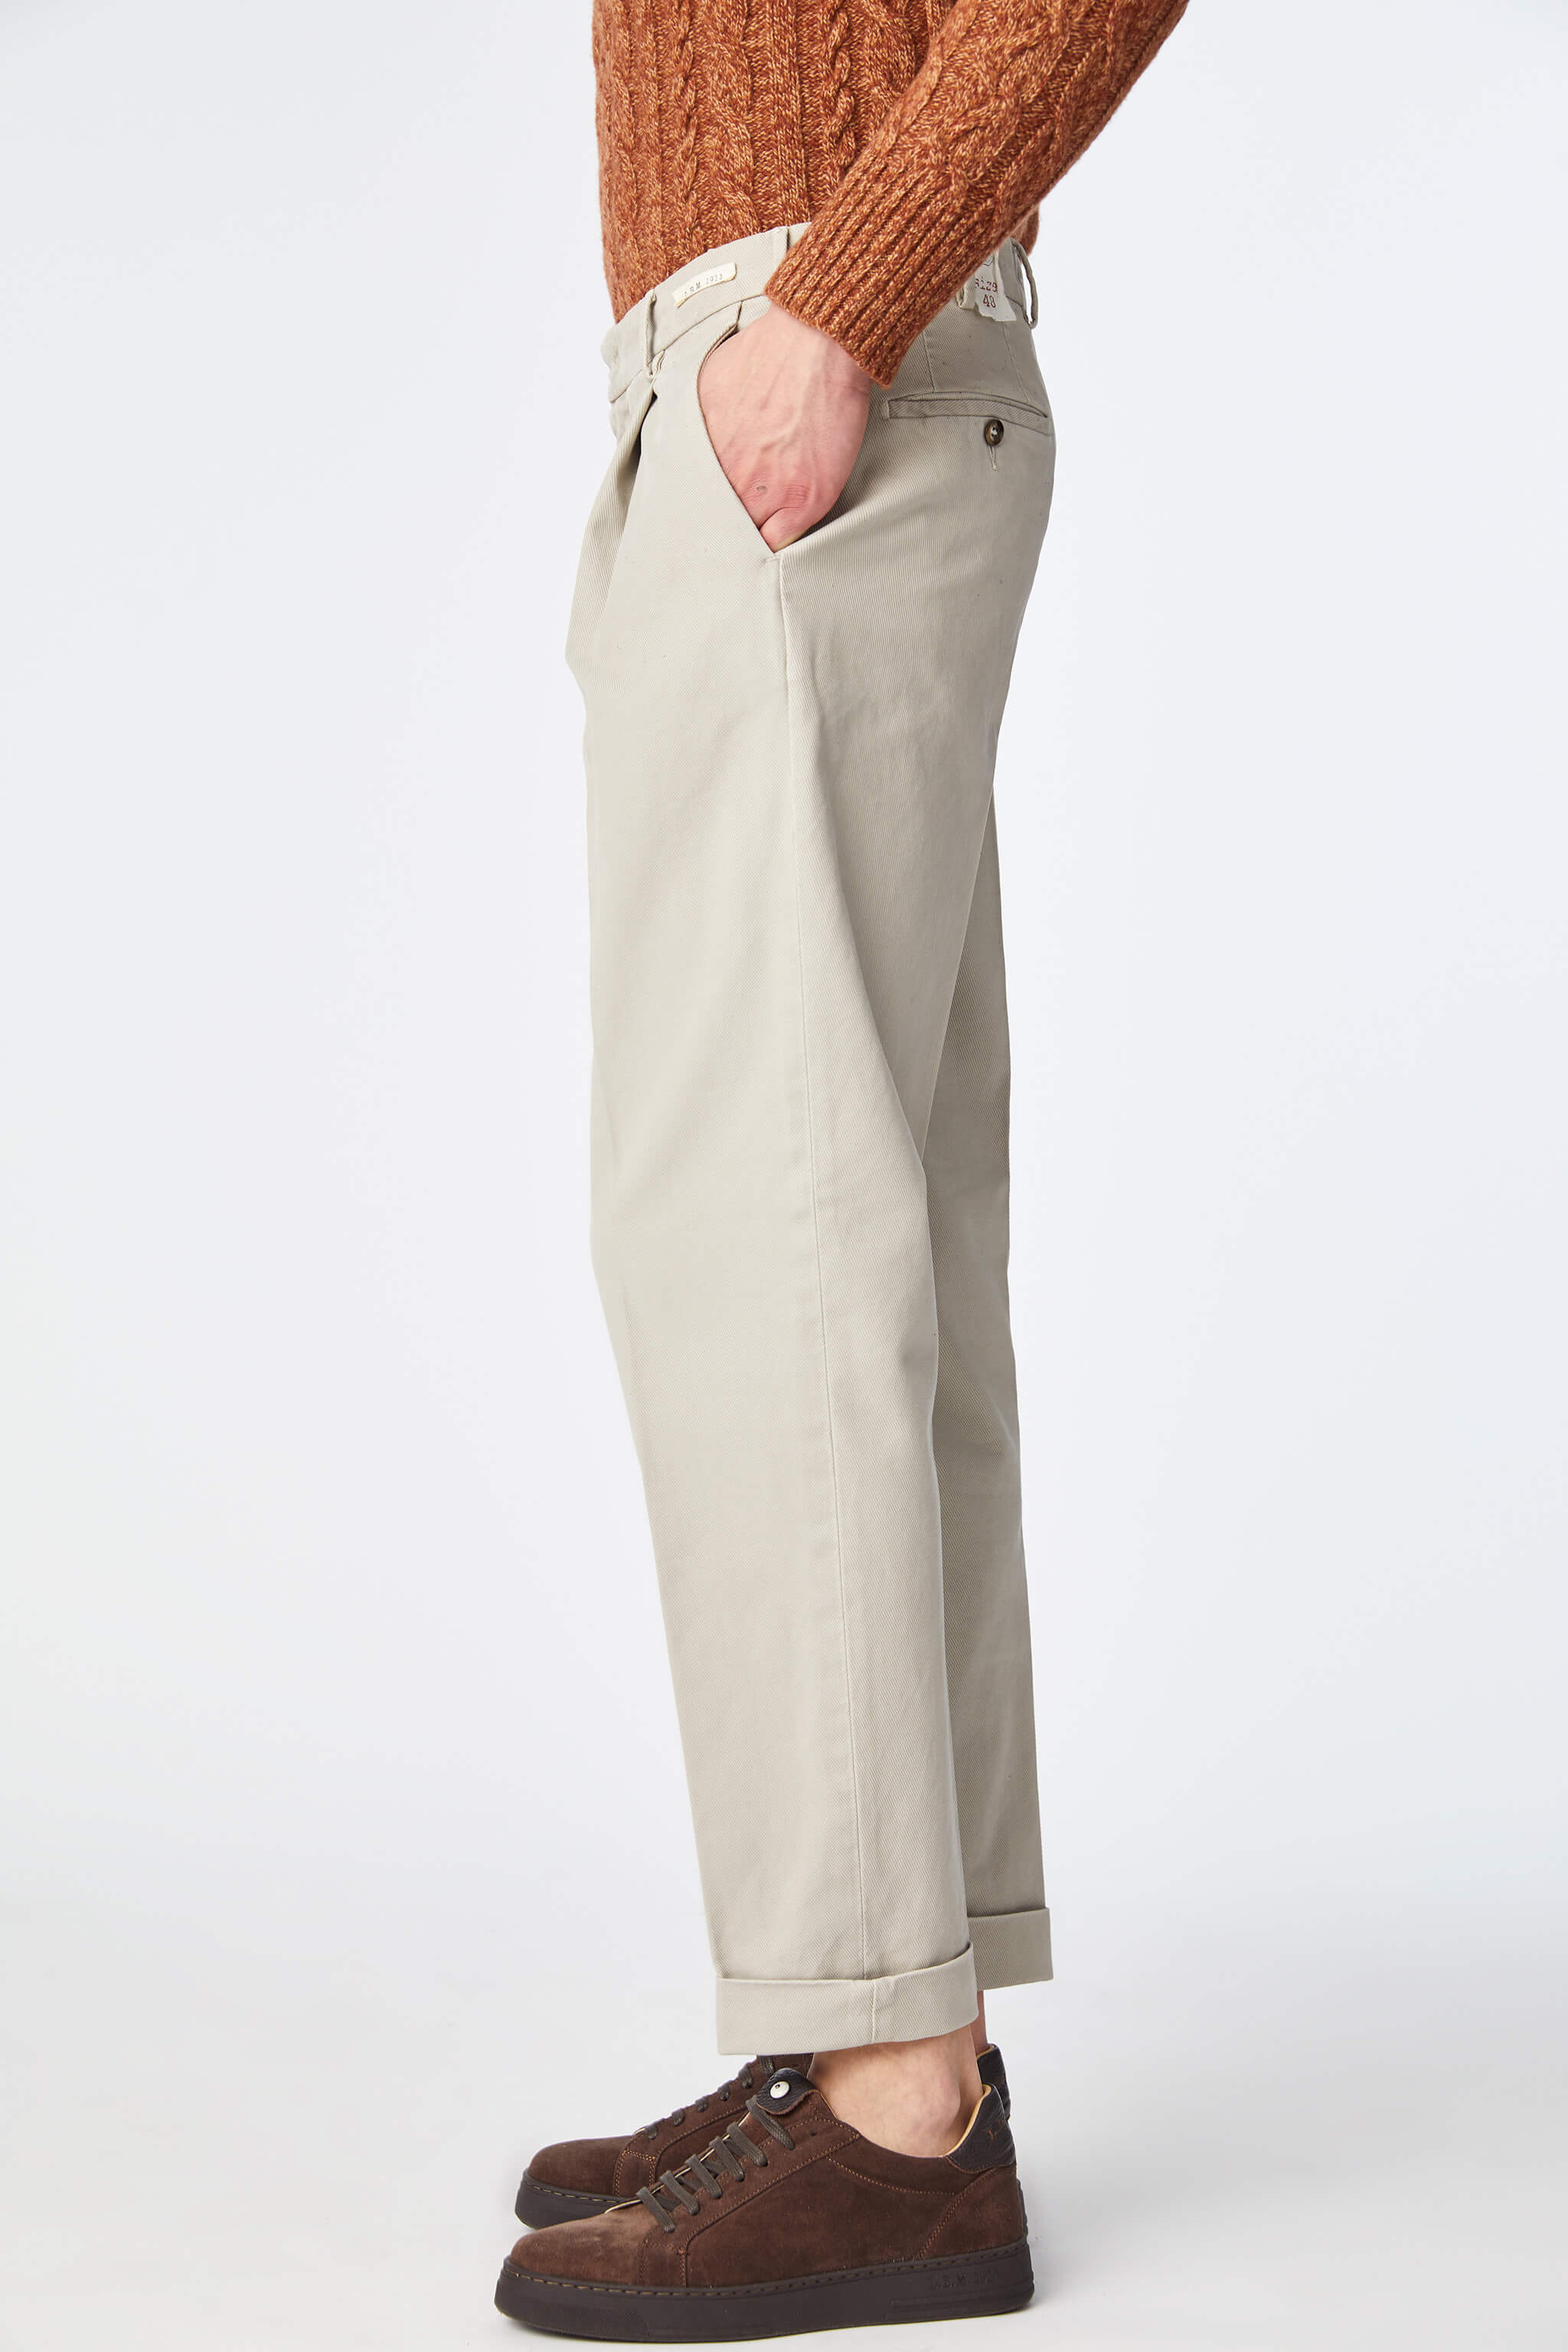 Garment-dyed MILES pants in gray